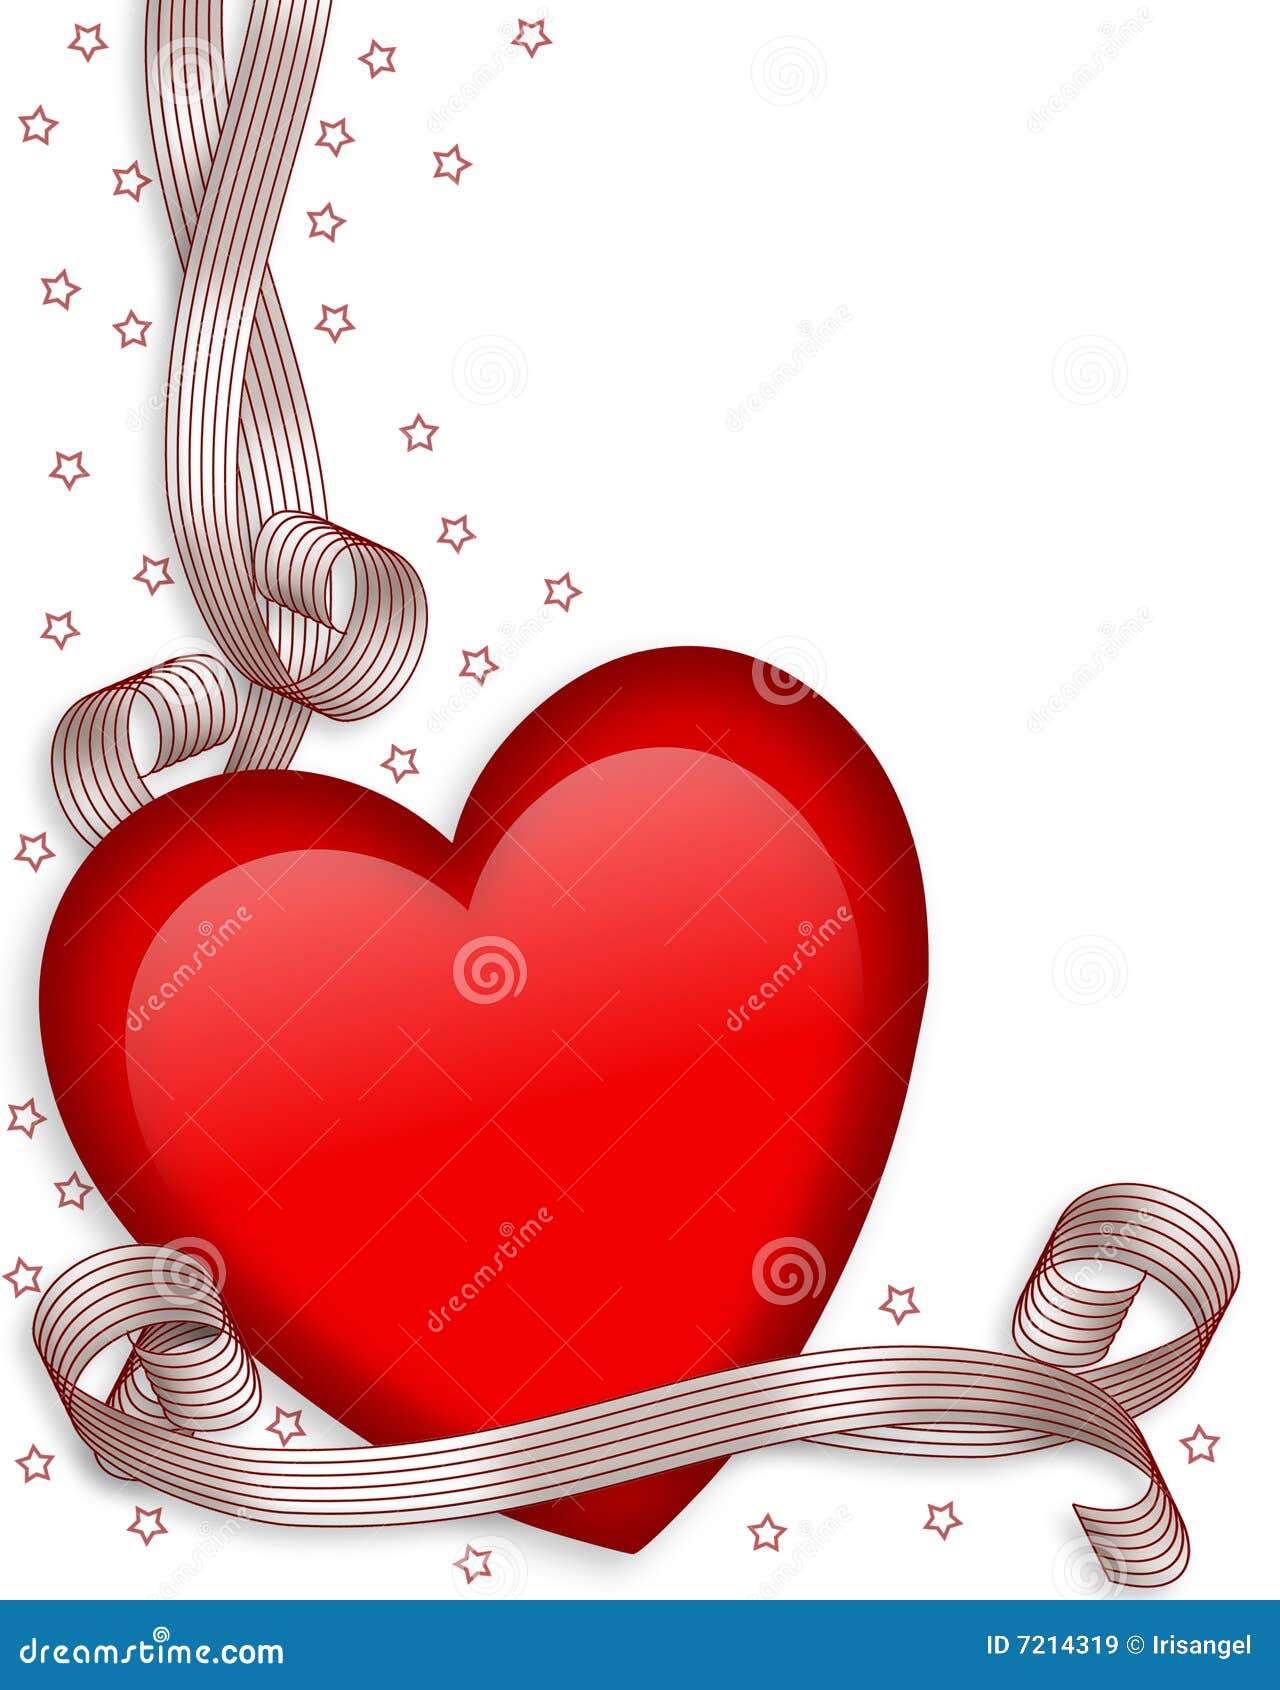 valentines day background clipart - photo #34